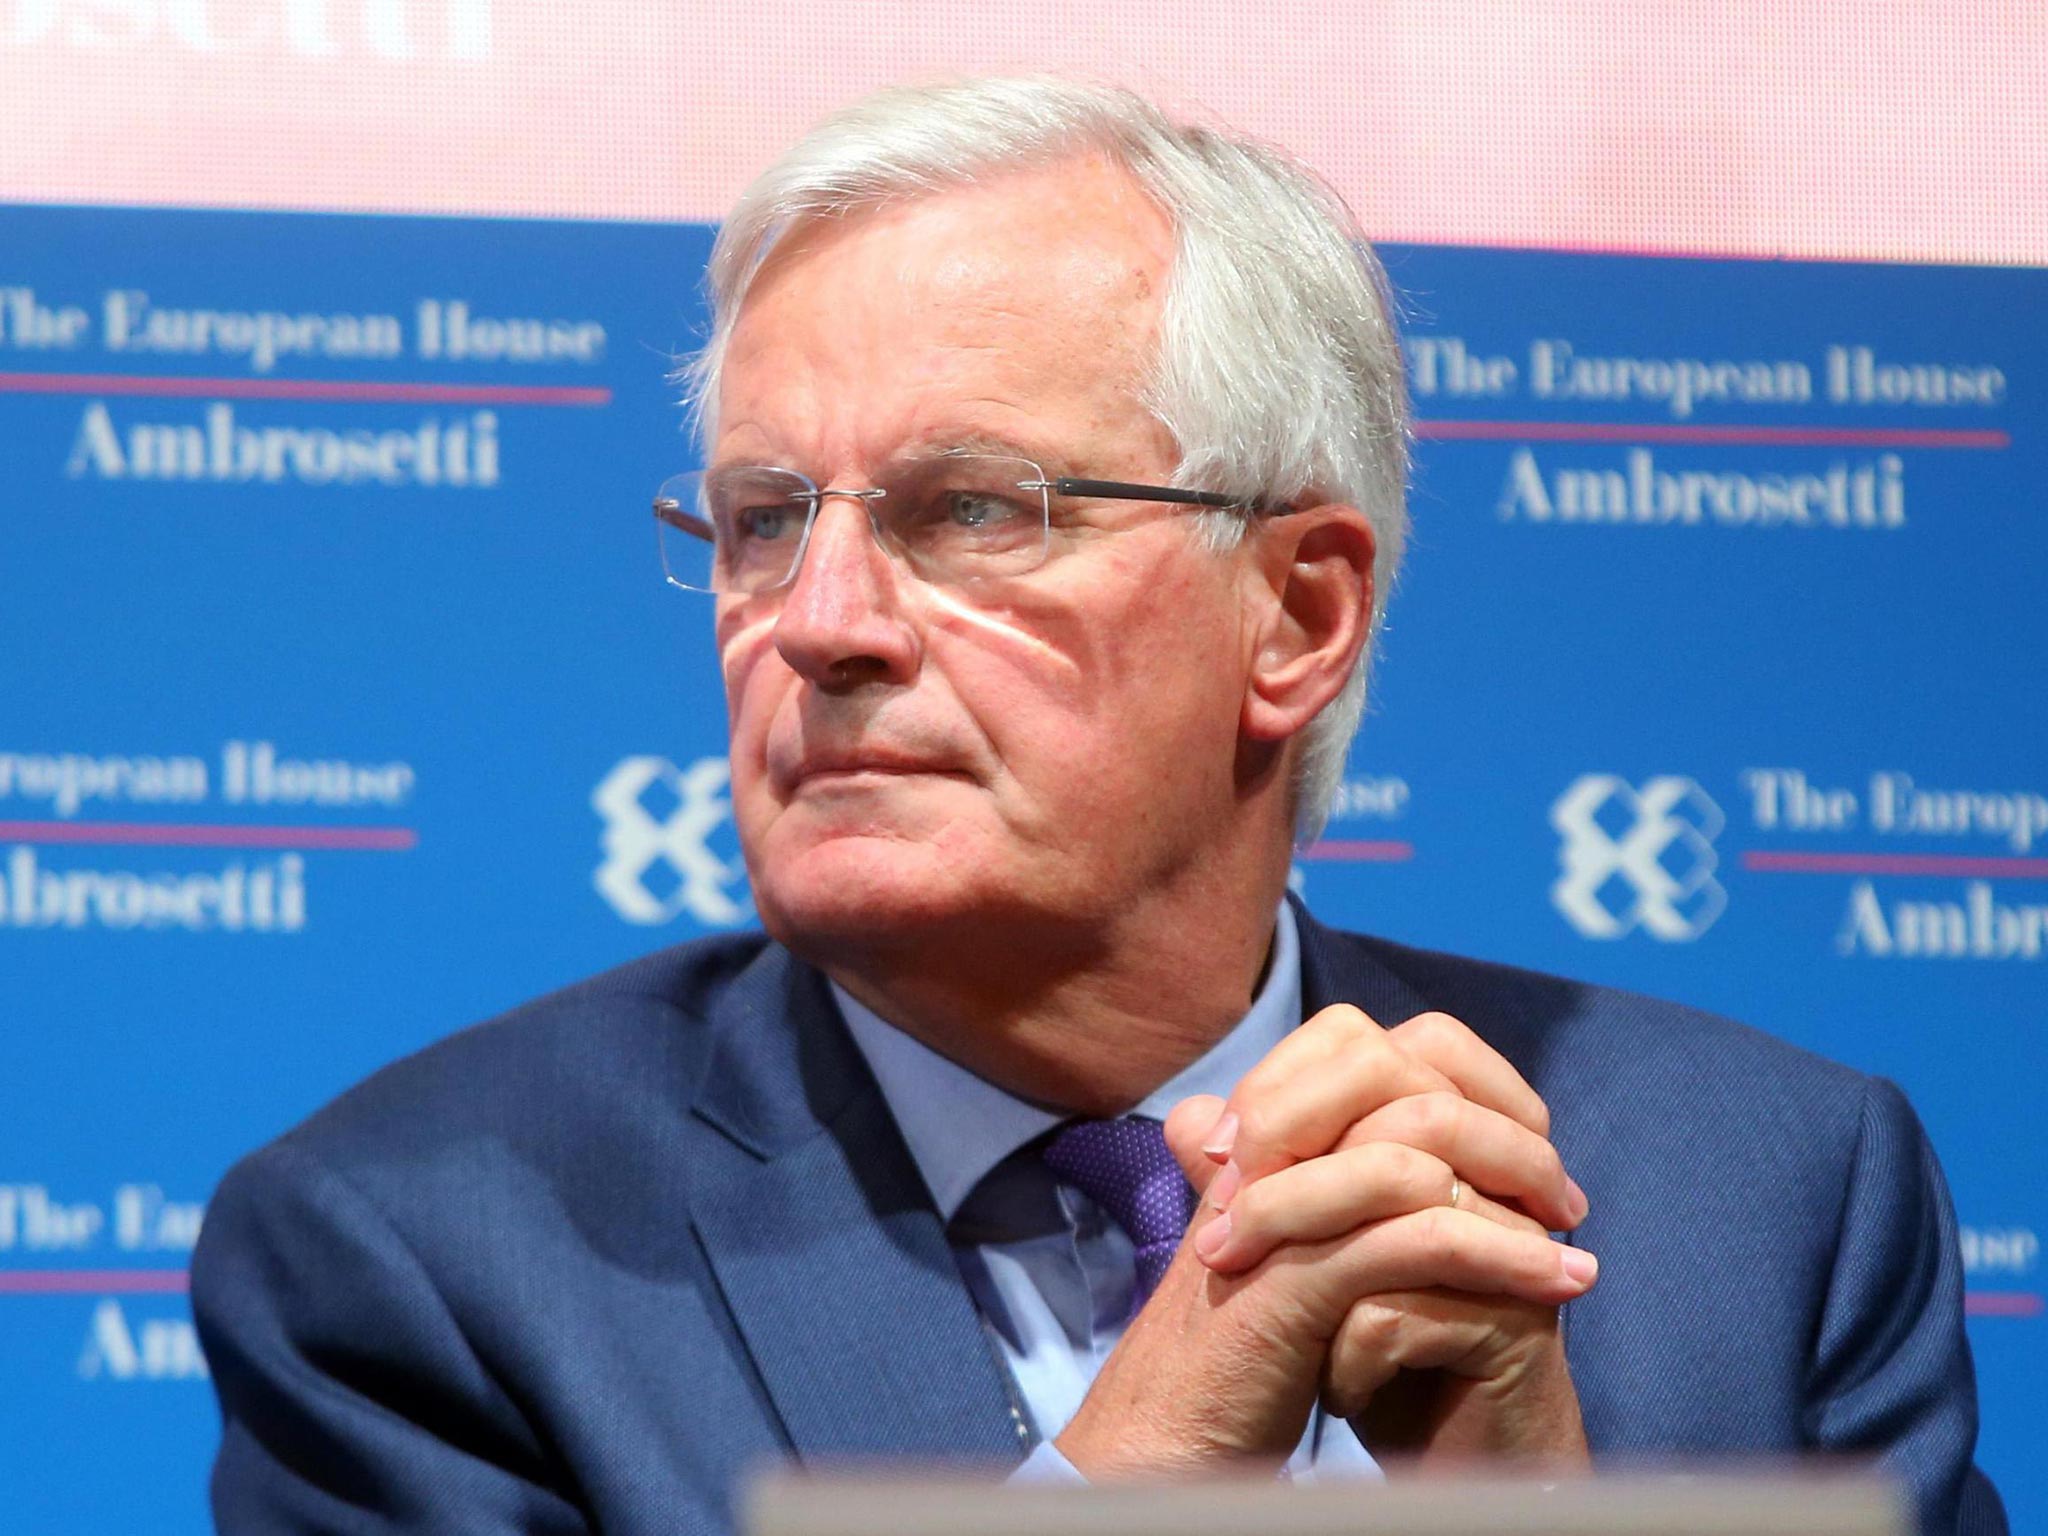 Speaking to journalists at the end of a fifth round of talks in Brussels, Michel Barnier said the lack of progress had become acute